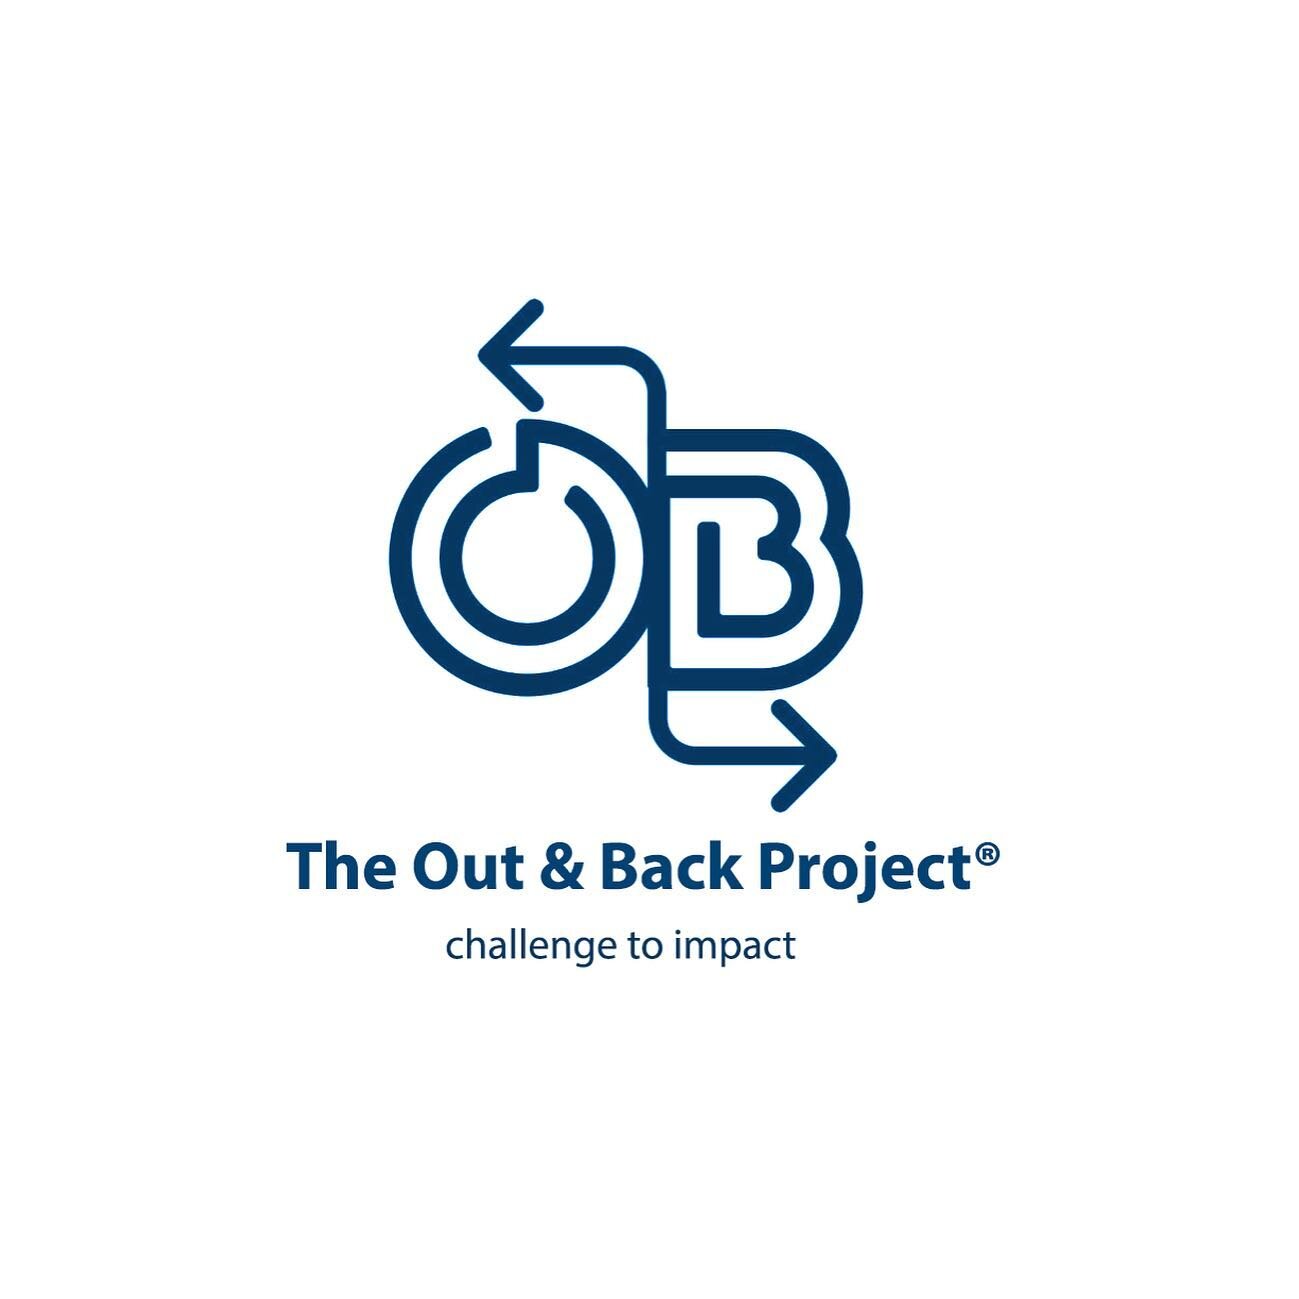 The Future of The Out &amp; Back Project 

A mission based organization launching physical challenges to bring awareness and fundraising to important economic and social issues. 

We believe in the power of physical challenges to drive more than just